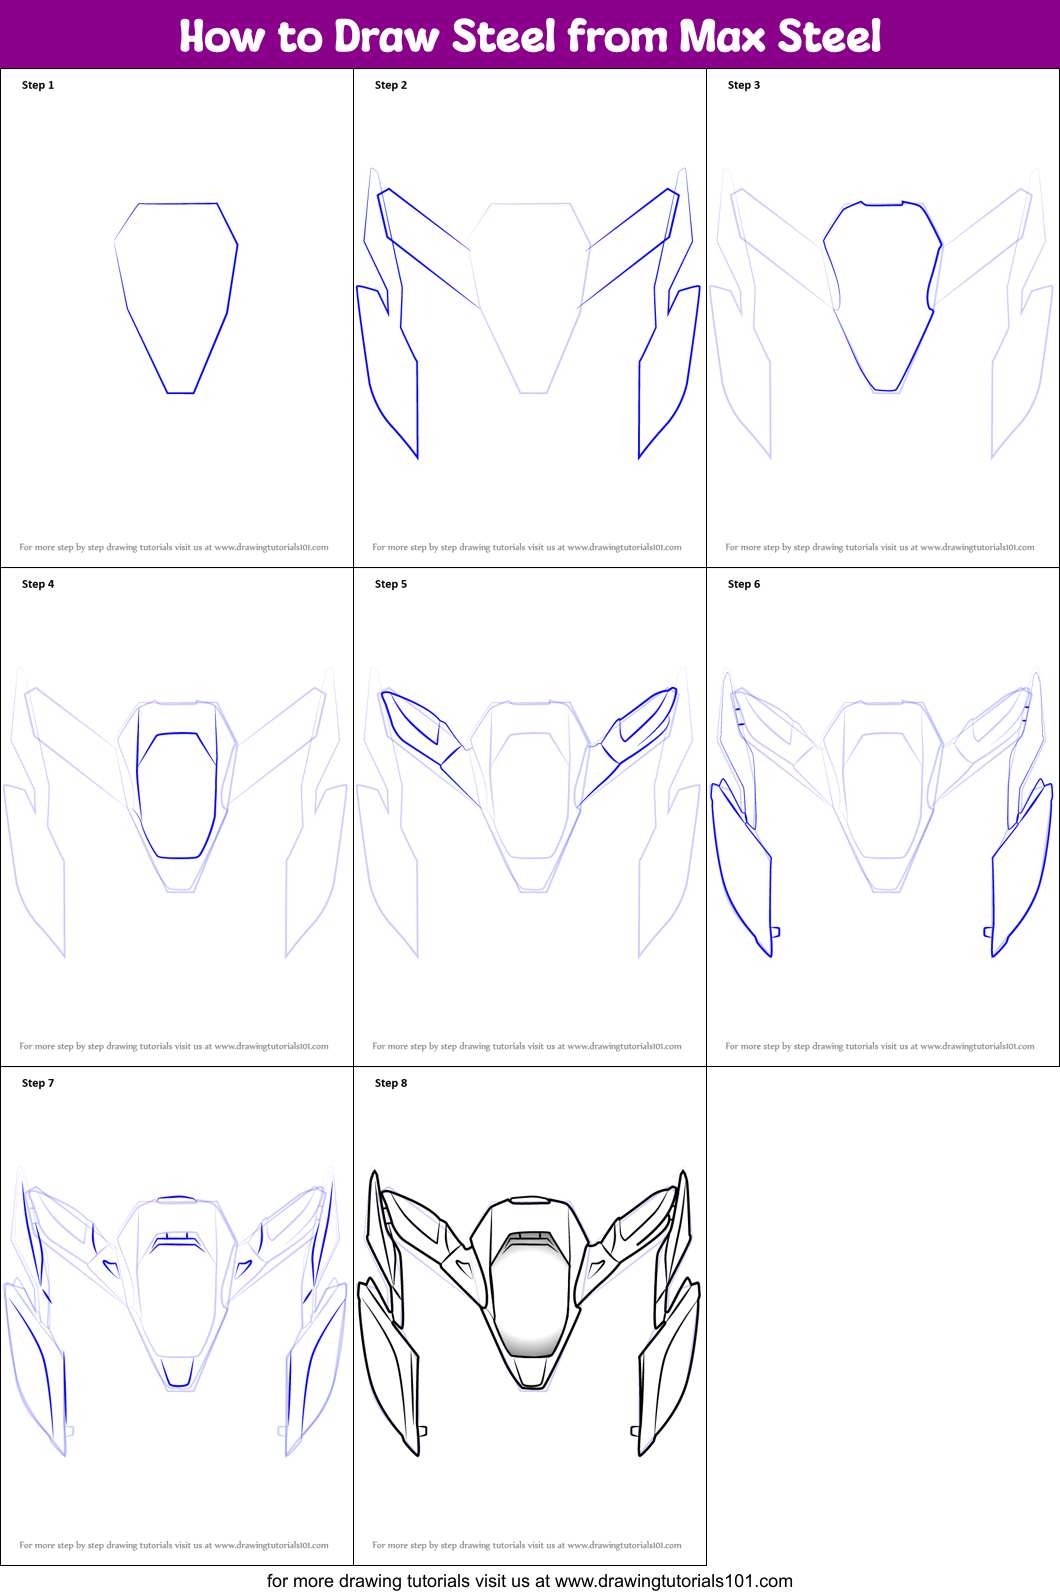 How to Draw Steel from Max Steel printable step by step drawing sheet